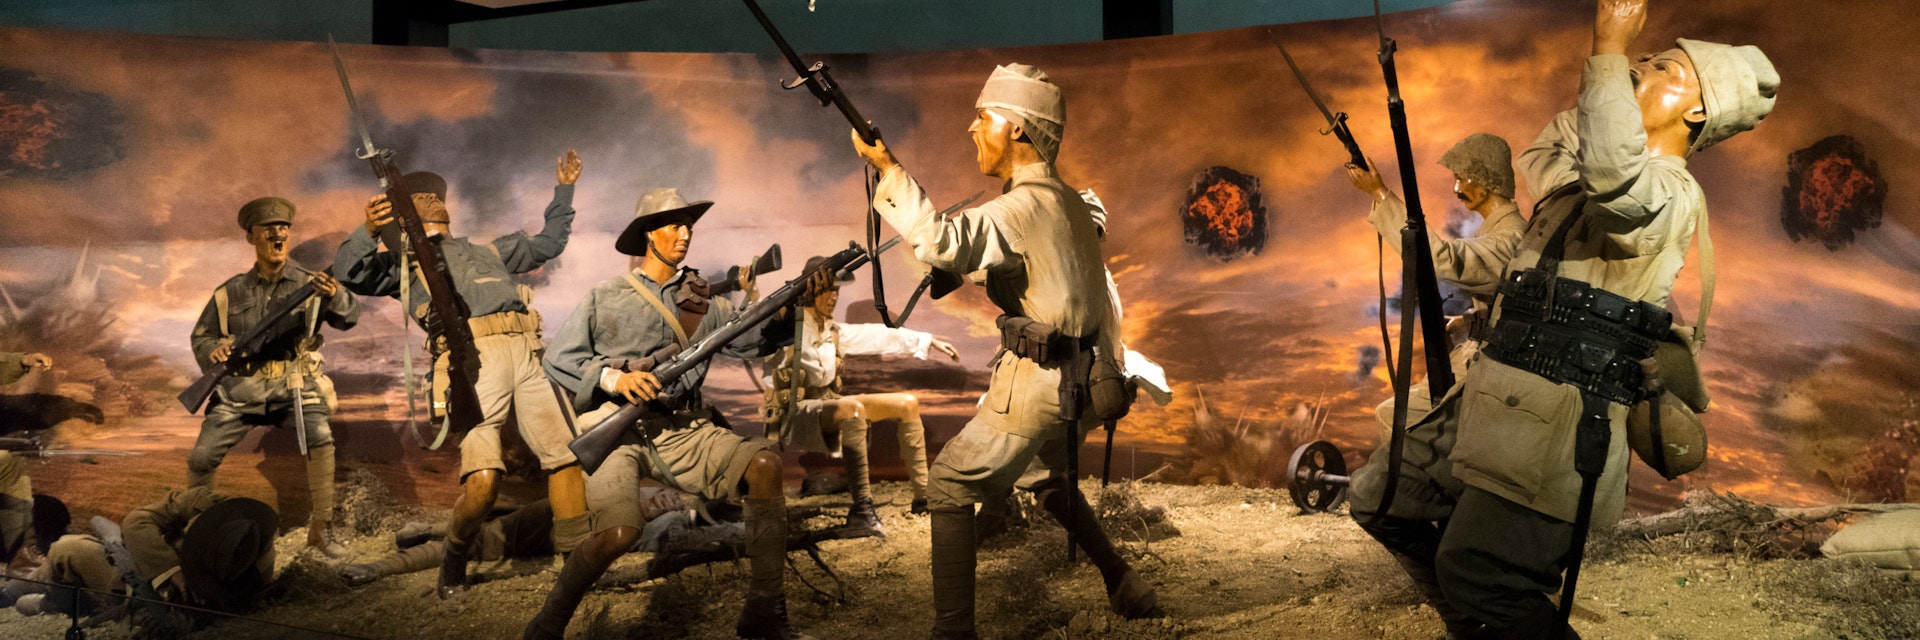 1 Aug 2017 A war scene from the Battle of Gallipoli in Canakkale legend promotion center. Gallipoli, Turkey; Shutterstock ID 1023708967; Your name (First / Last): Lauren Vastine; GL account no.: 65050; Netsuite department name: Online Editorial; Full Product or Project name including edition: BiA Imagery